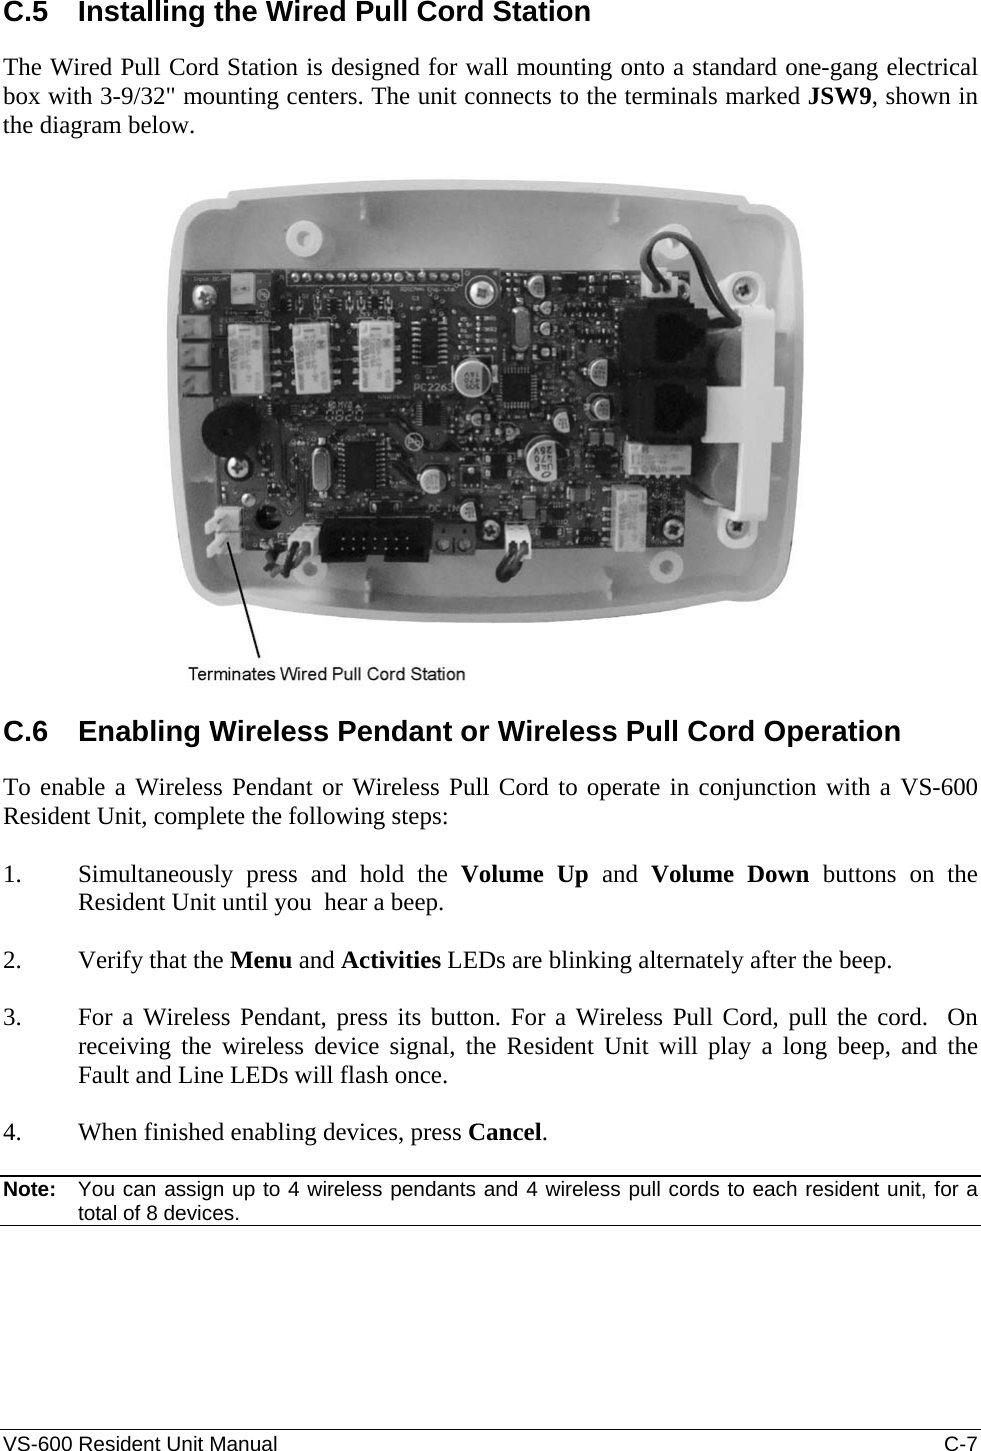 VS-600 Resident Unit Manual    C-7 C.5  Installing the Wired Pull Cord Station The Wired Pull Cord Station is designed for wall mounting onto a standard one-gang electrical box with 3-9/32&quot; mounting centers. The unit connects to the terminals marked JSW9, shown in the diagram below.    C.6  Enabling Wireless Pendant or Wireless Pull Cord Operation To enable a Wireless Pendant or Wireless Pull Cord to operate in conjunction with a VS-600 Resident Unit, complete the following steps:  1. Simultaneously press and hold the Volume Up and Volume Down buttons on the Resident Unit until you  hear a beep.  2. Verify that the Menu and Activities LEDs are blinking alternately after the beep.  3. For a Wireless Pendant, press its button. For a Wireless Pull Cord, pull the cord.  On receiving the wireless device signal, the Resident Unit will play a long beep, and the Fault and Line LEDs will flash once.   4. When finished enabling devices, press Cancel.  Note:   You can assign up to 4 wireless pendants and 4 wireless pull cords to each resident unit, for a total of 8 devices. 